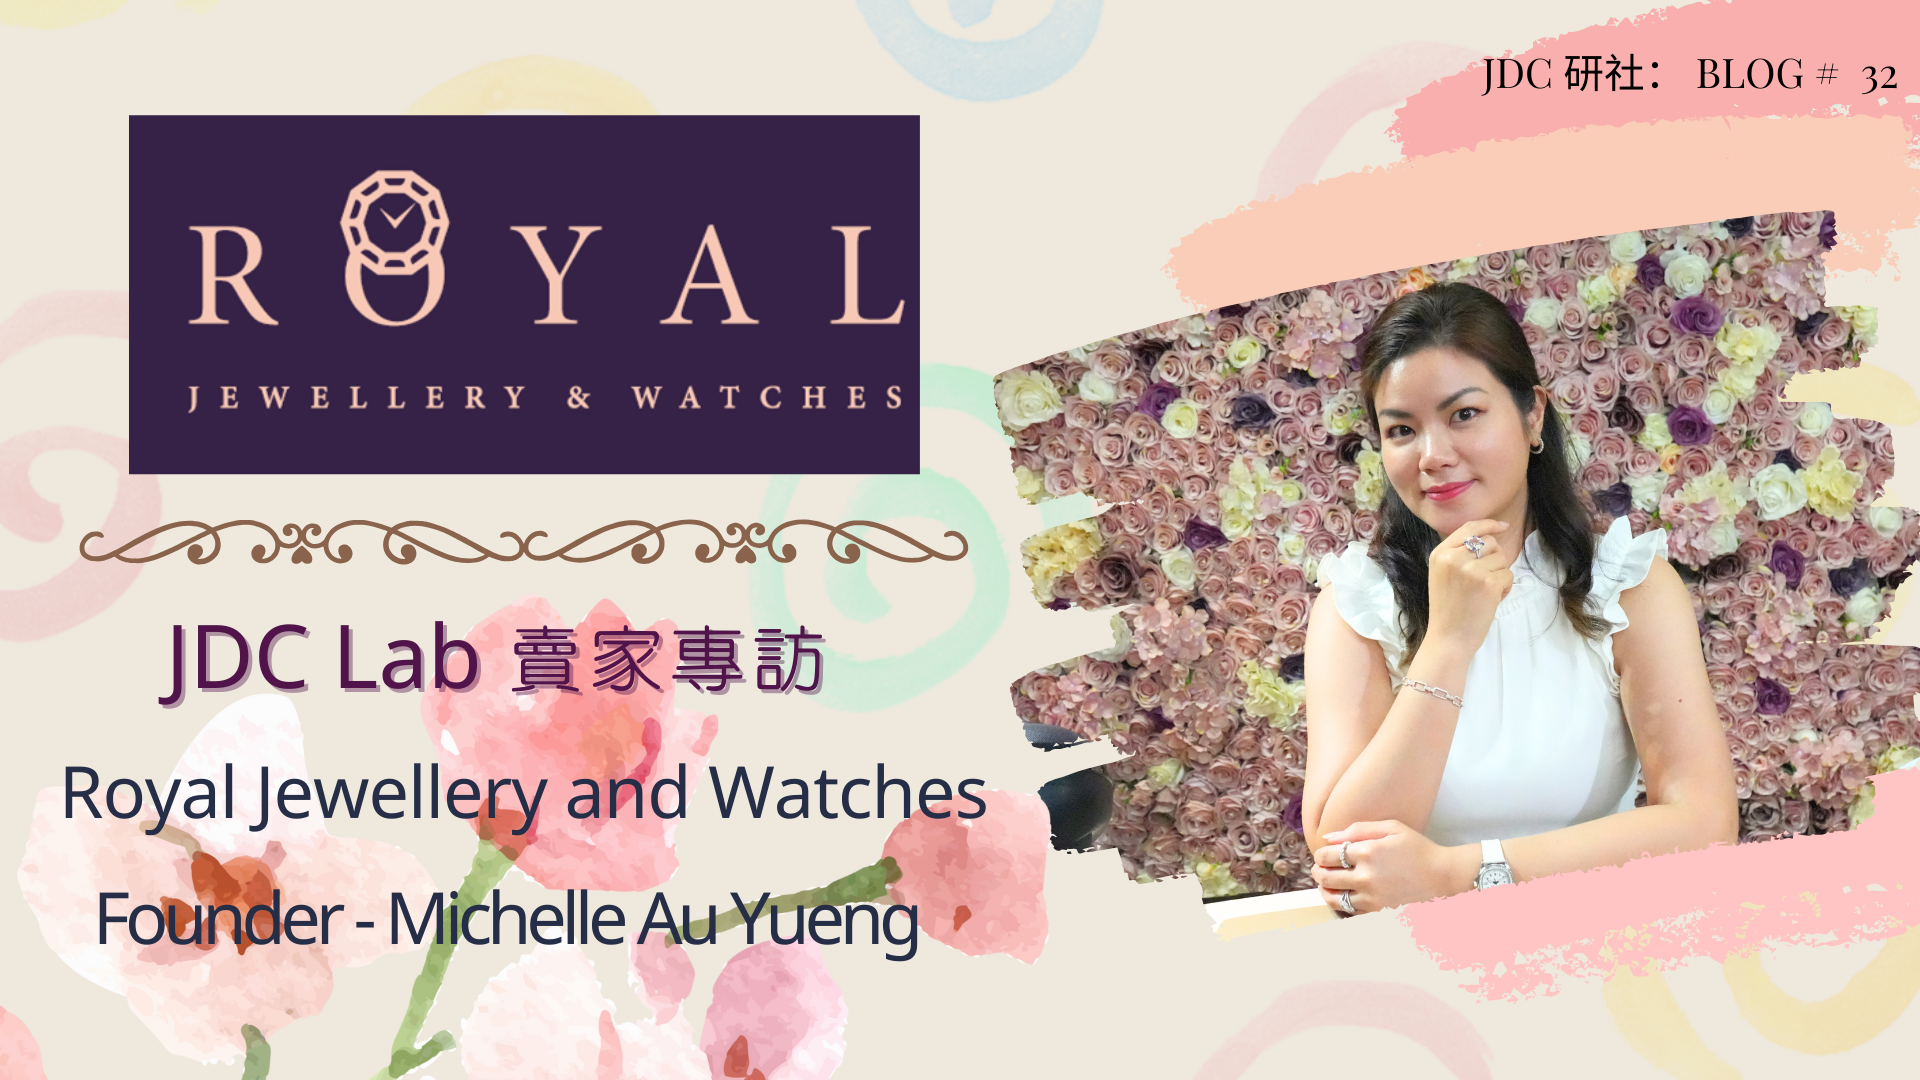 【JDC Lab 珠寶賣家專訪 — 情侶珠寶推介】Michelle Au Young｜ Royal Jewellery and Watches